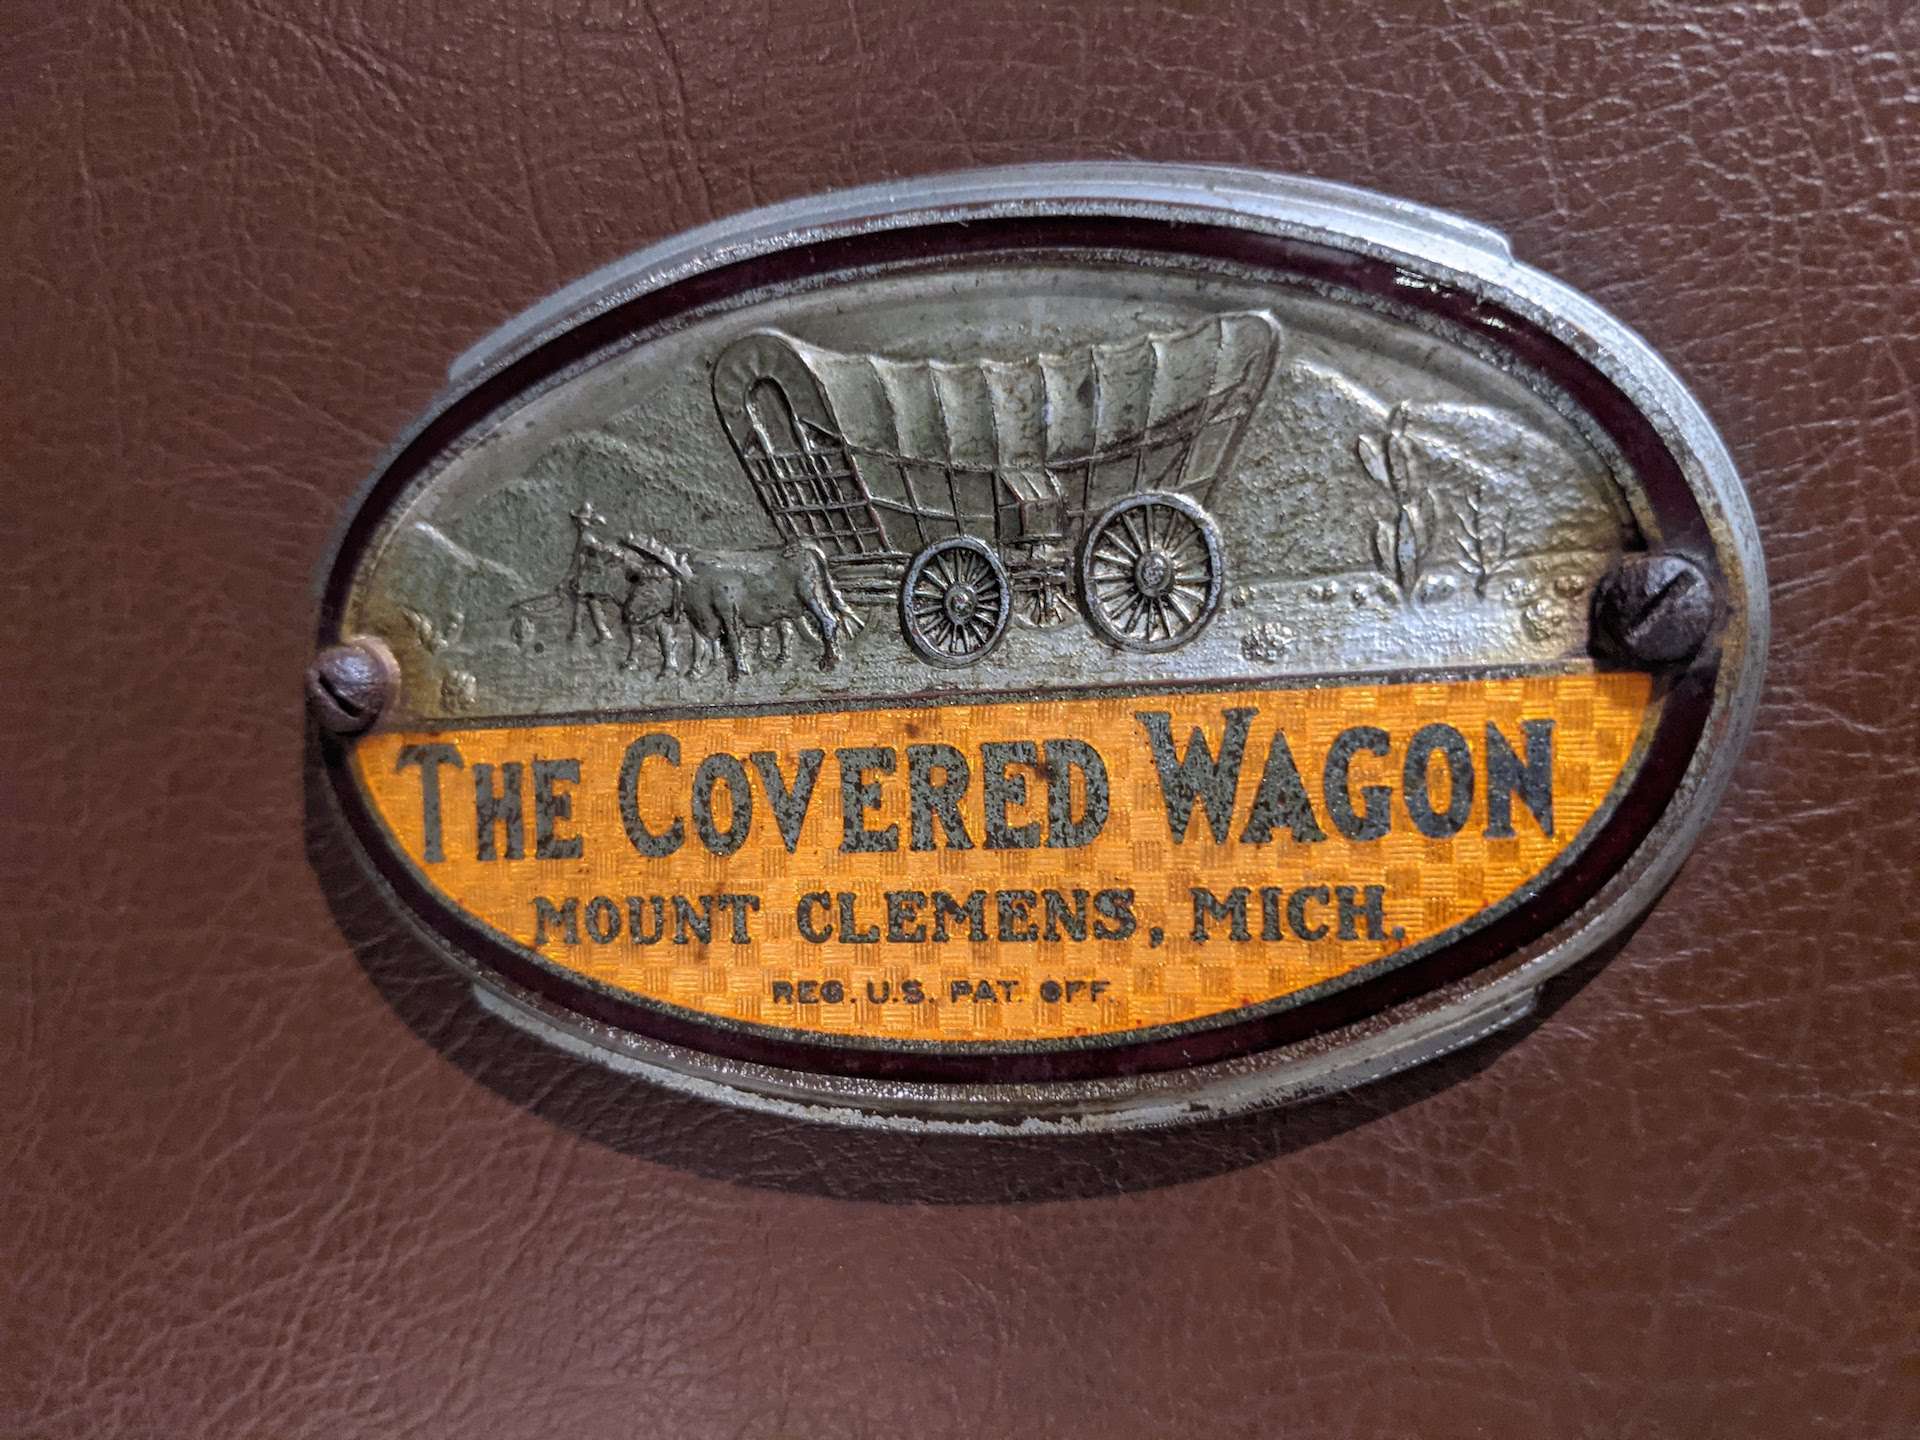 The covered wagon company logo mount clemens, mich.